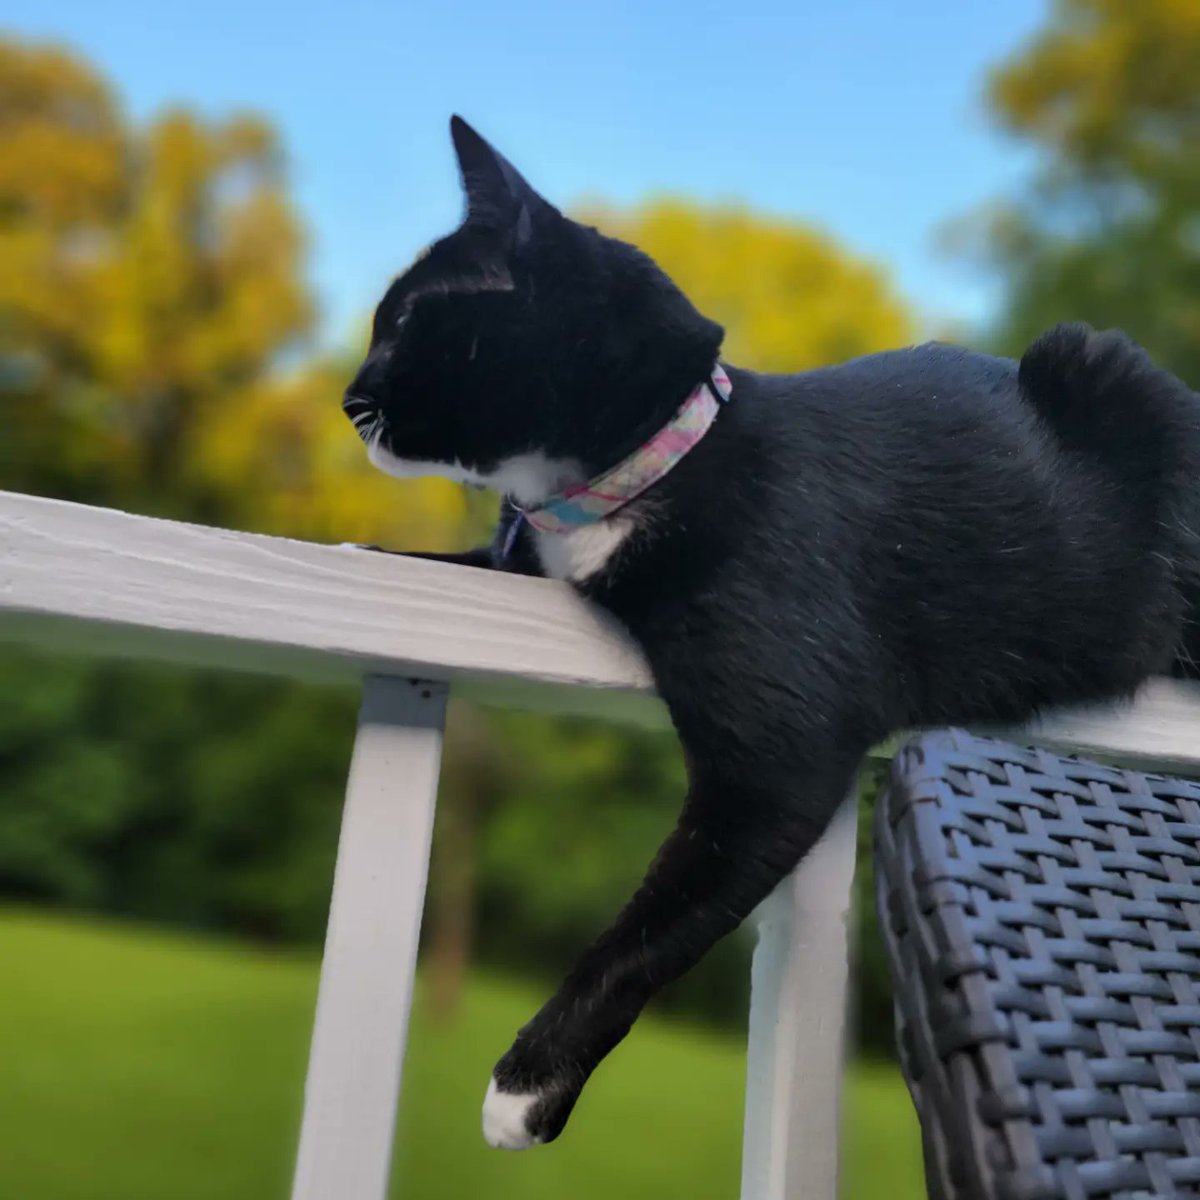 Enjoying my #memorialday on the back deck with the parents after a long travel day from Maryland. #happykitty #catsagram #catlove #catloversclub #catofinstagram #catscatscats #cats_of_world #CatsOfTwitter